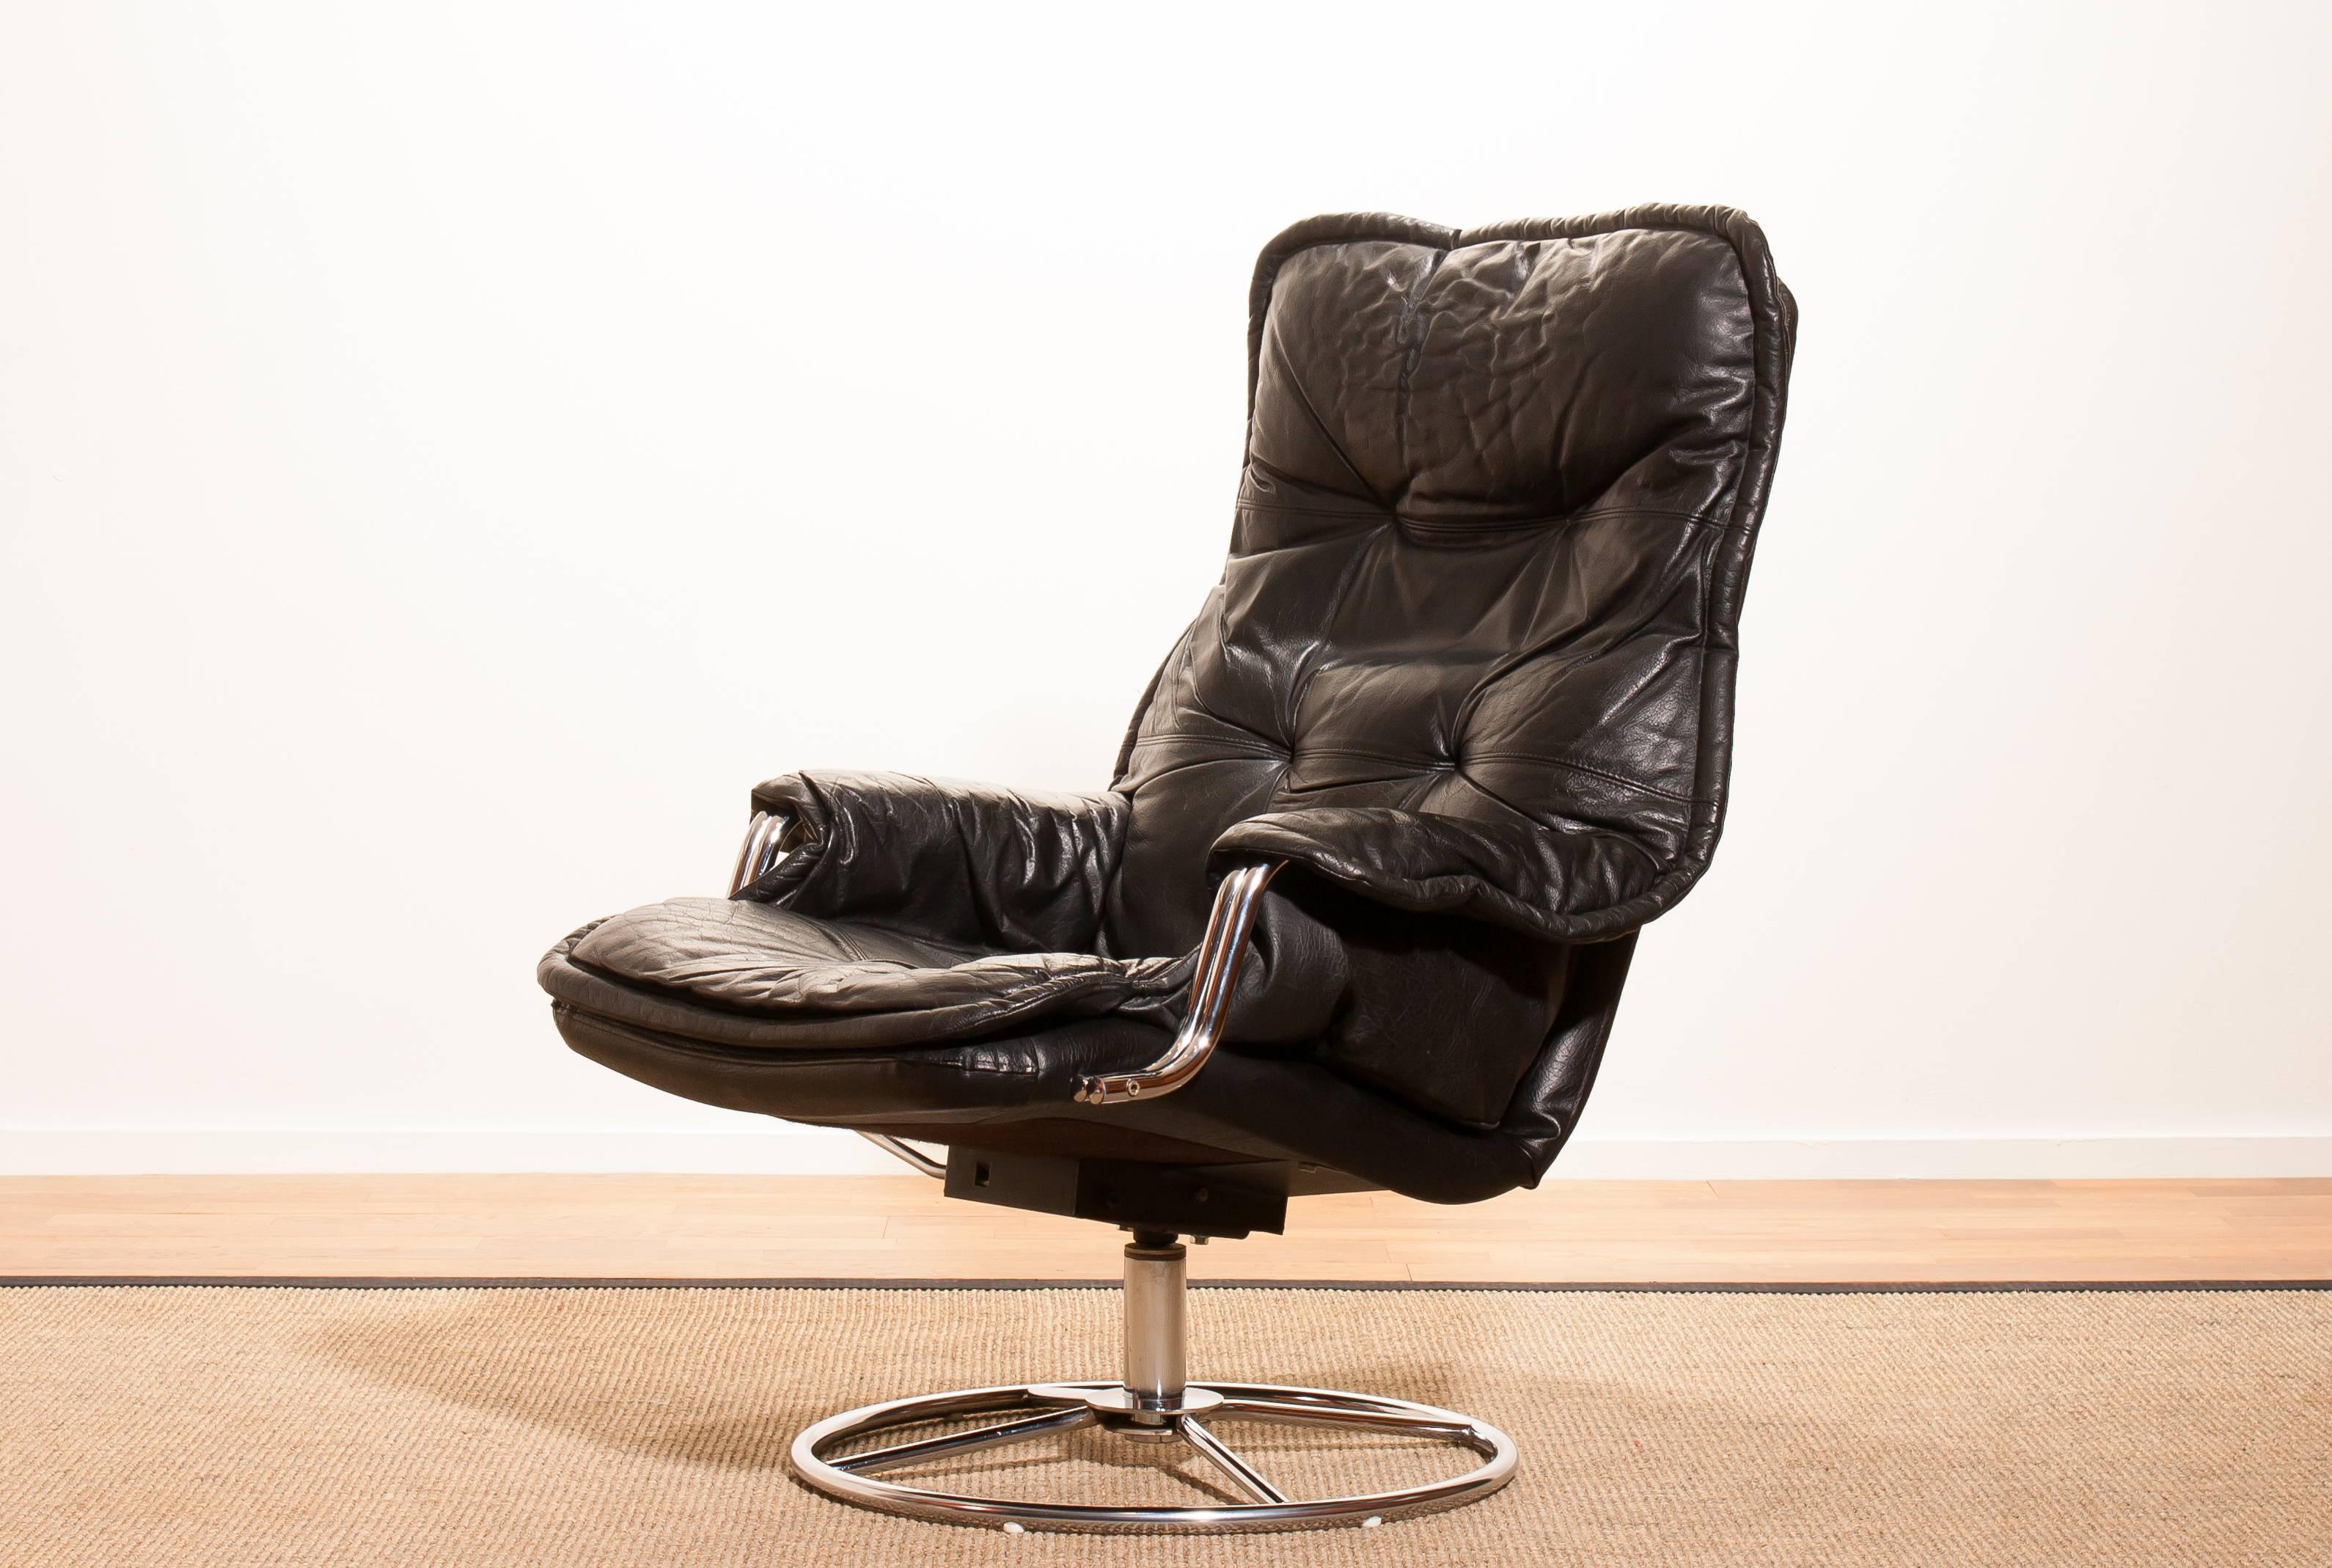 Beautiful lounge chair made in Sweden.
This very nice design chair has a black leather seating and armrests on a swivel chrome steel frame.
It is in a wonderful condition.
Period 1970s
Dimensions : H 94 cm, W 68 cm, D 72 cm, SH 40.